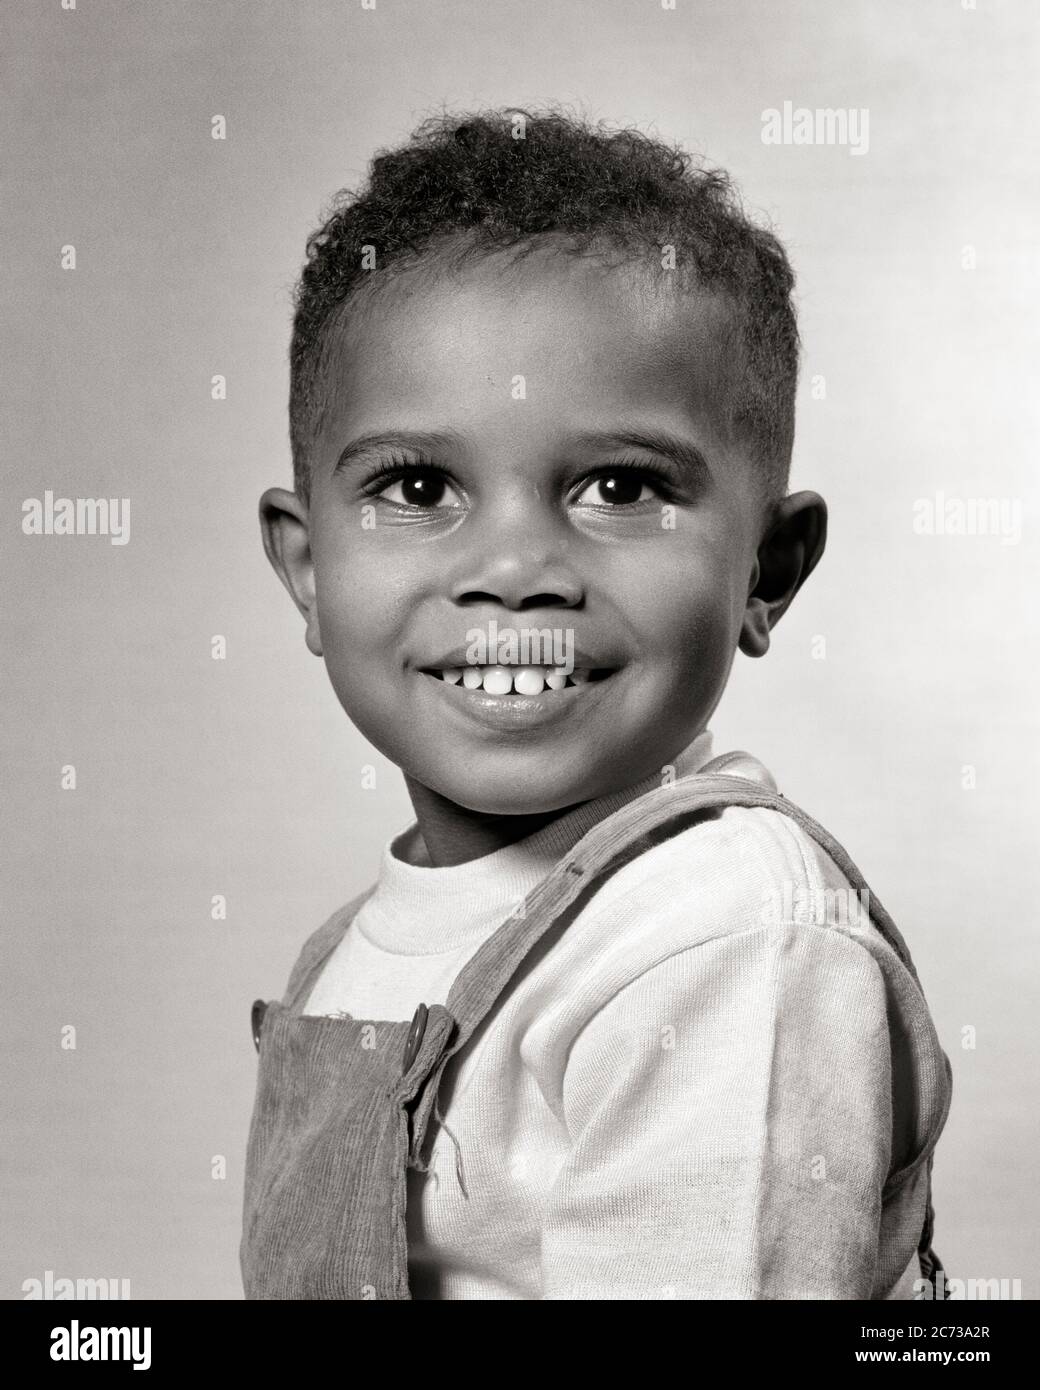 1940s 1950s PORTRAIT BRIGHT-EYED SMILING AFRICAN-AMERICAN BOY TODDLER WEARING CORDUROY BIB OVERALLS LOOKING AT CAMERA DIRECTLY  - n637 HAR001 HARS OVERALLS MALES CONFIDENCE EXPRESSIONS B&W FREEDOM DREAMS HAPPINESS WELLNESS HEAD AND SHOULDERS CHEERFUL STRENGTH AFRICAN-AMERICANS AFRICAN-AMERICAN HOPE CORDUROY EXTERIOR BLACK ETHNICITY PRIDE OPPORTUNITY SMILES DIRECTLY CONCEPTUAL IMAGINATION JOYFUL STYLISH BABY BOY PROMISE BIB GROWTH JUVENILES BLACK AND WHITE HAR001 OLD FASHIONED AFRICAN AMERICANS Stock Photo